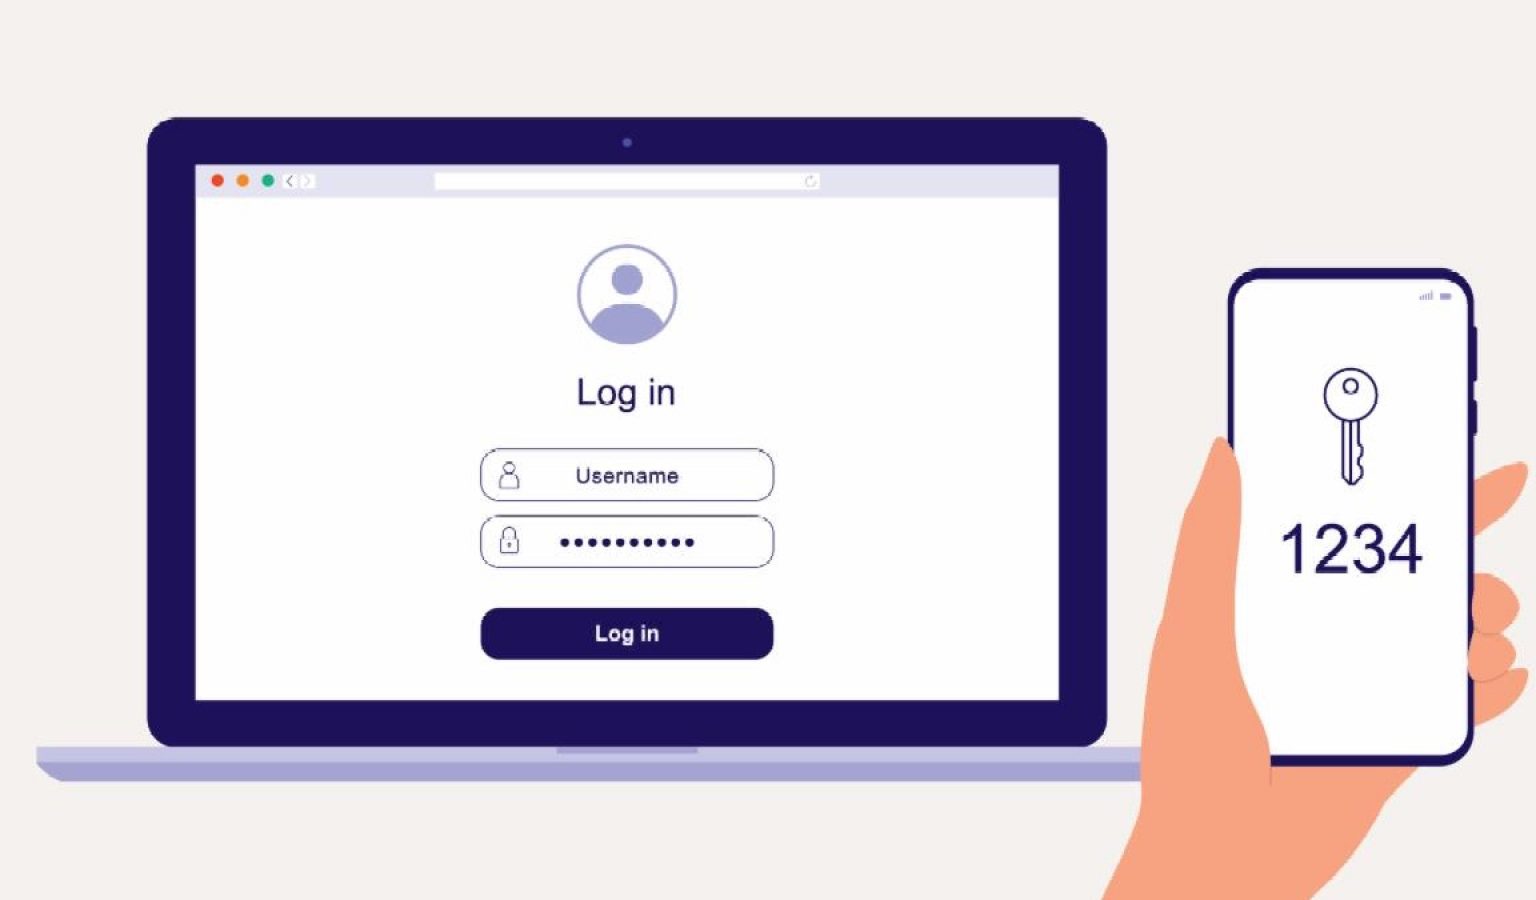 Stock photo showing computer login screen with accompanying phone password